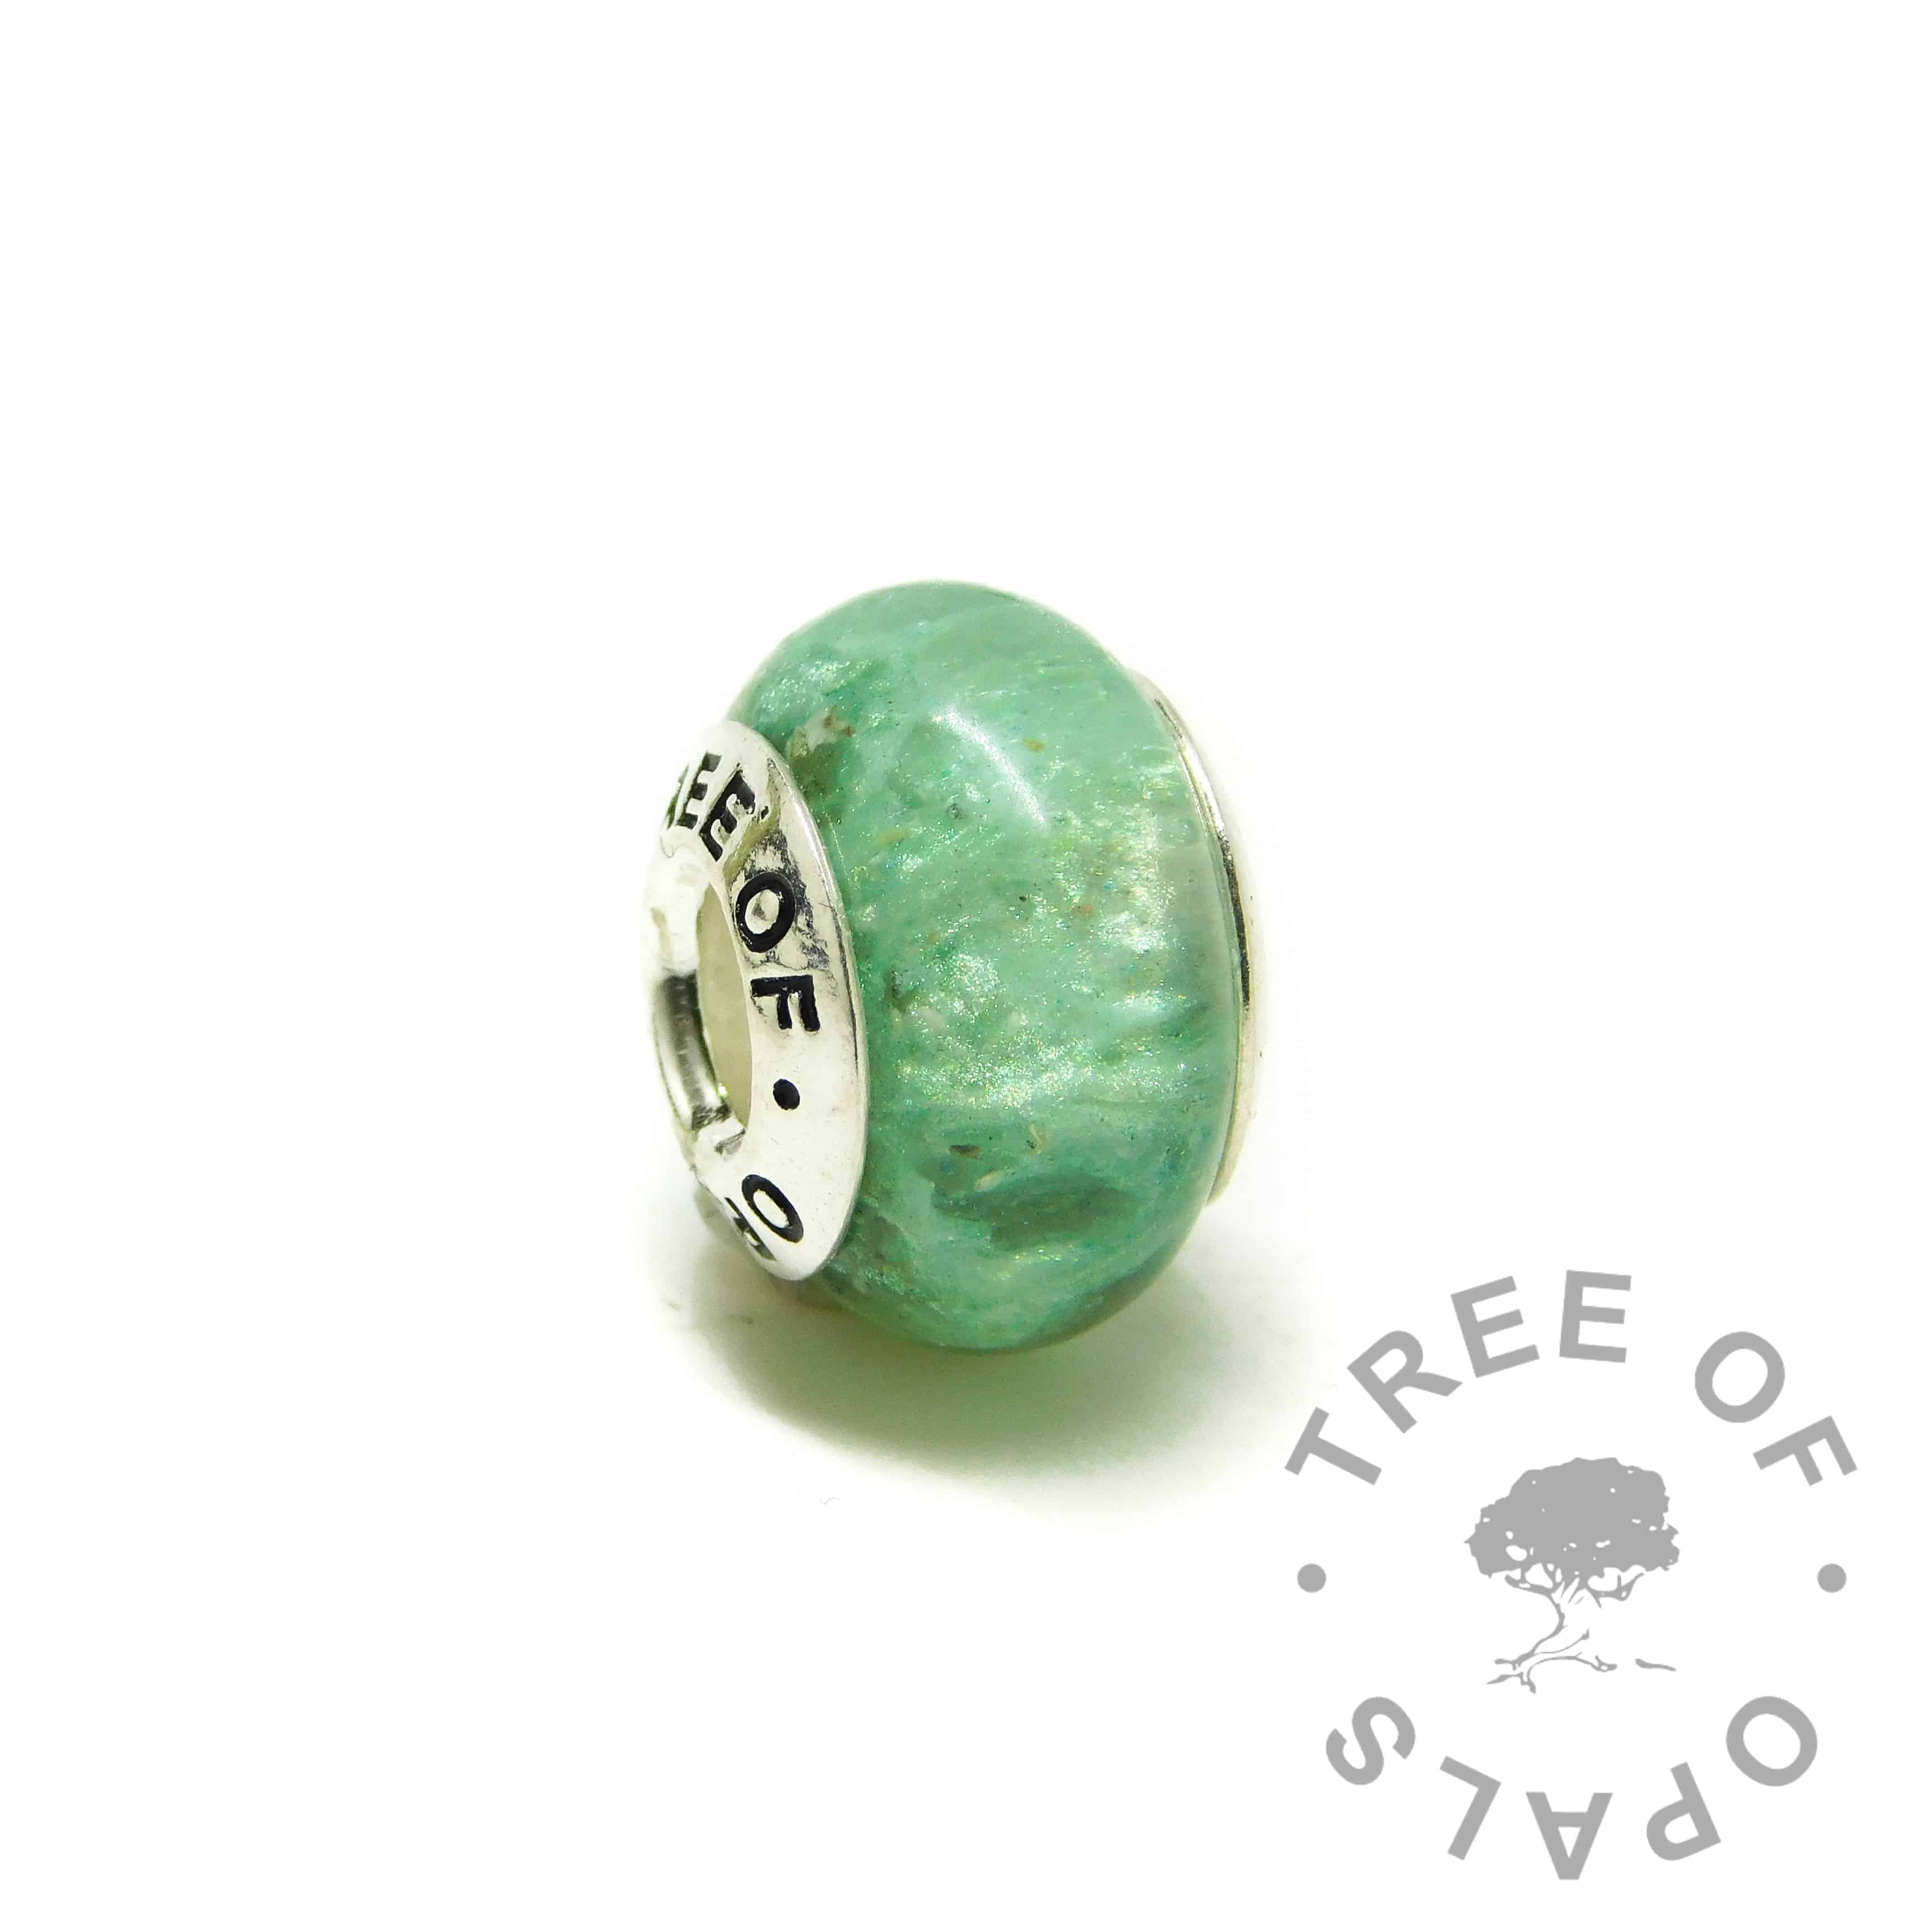 ashes charm with Tree of Opals core, angelic aqua resin sparkle mix cremation ashes charm bead